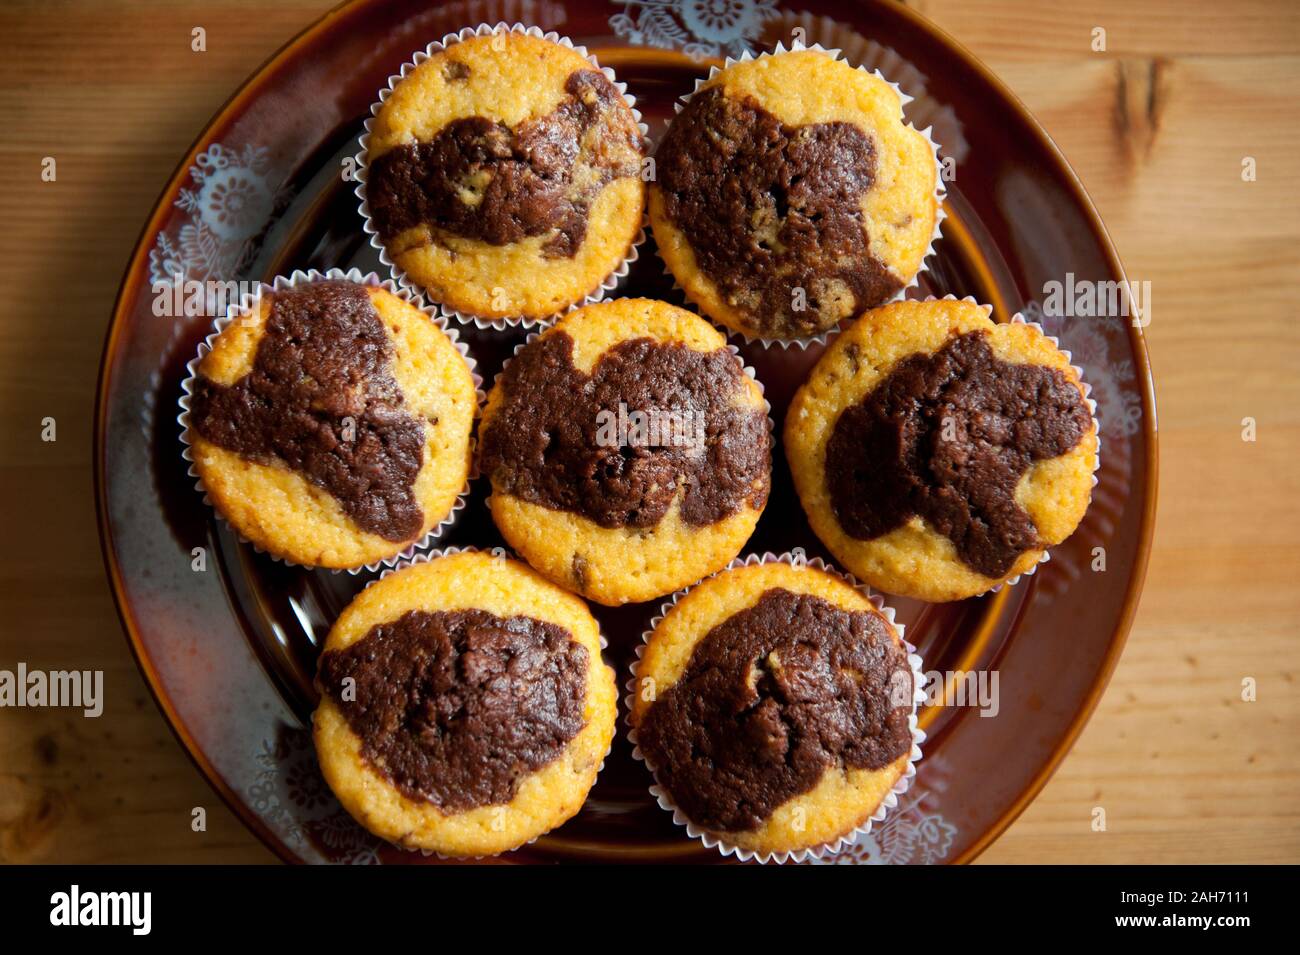 Lemon with chocolate taste muffins, few homemade delicious cupcakes lying on dark brown plate on table, sweet treats view from above, baked food. Stock Photo